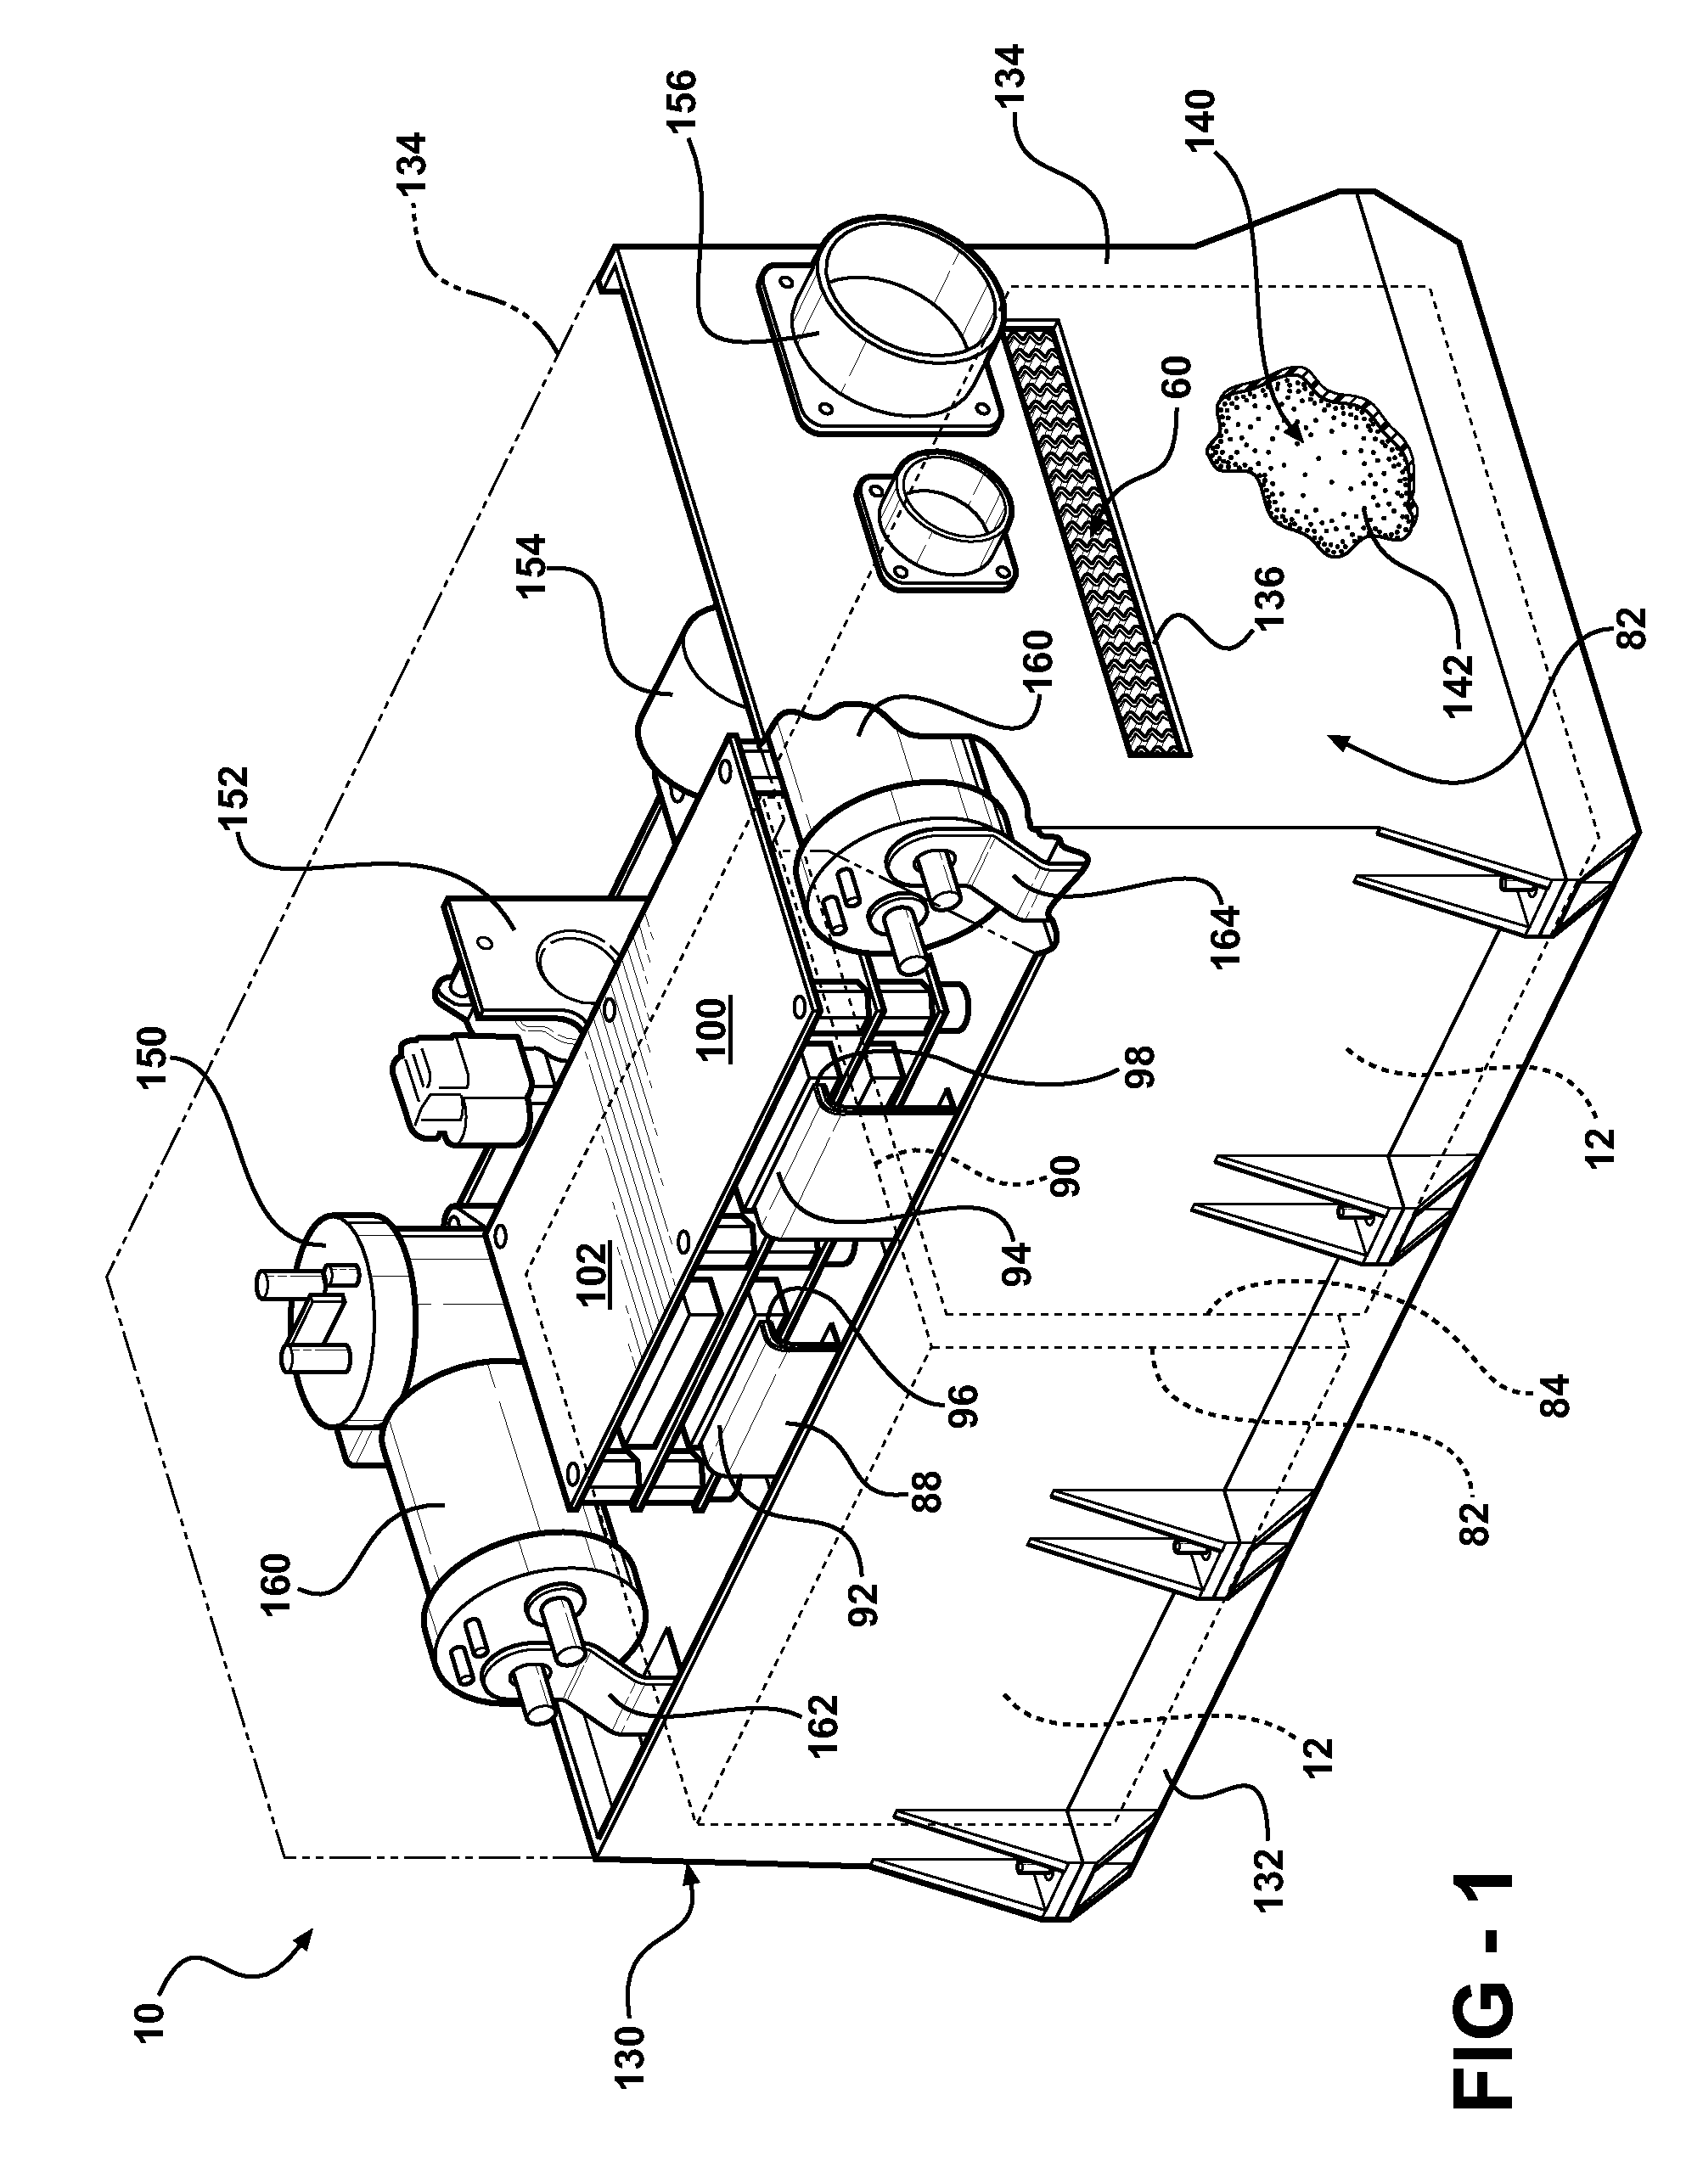 Battery pack with integral cooling and bussing devices